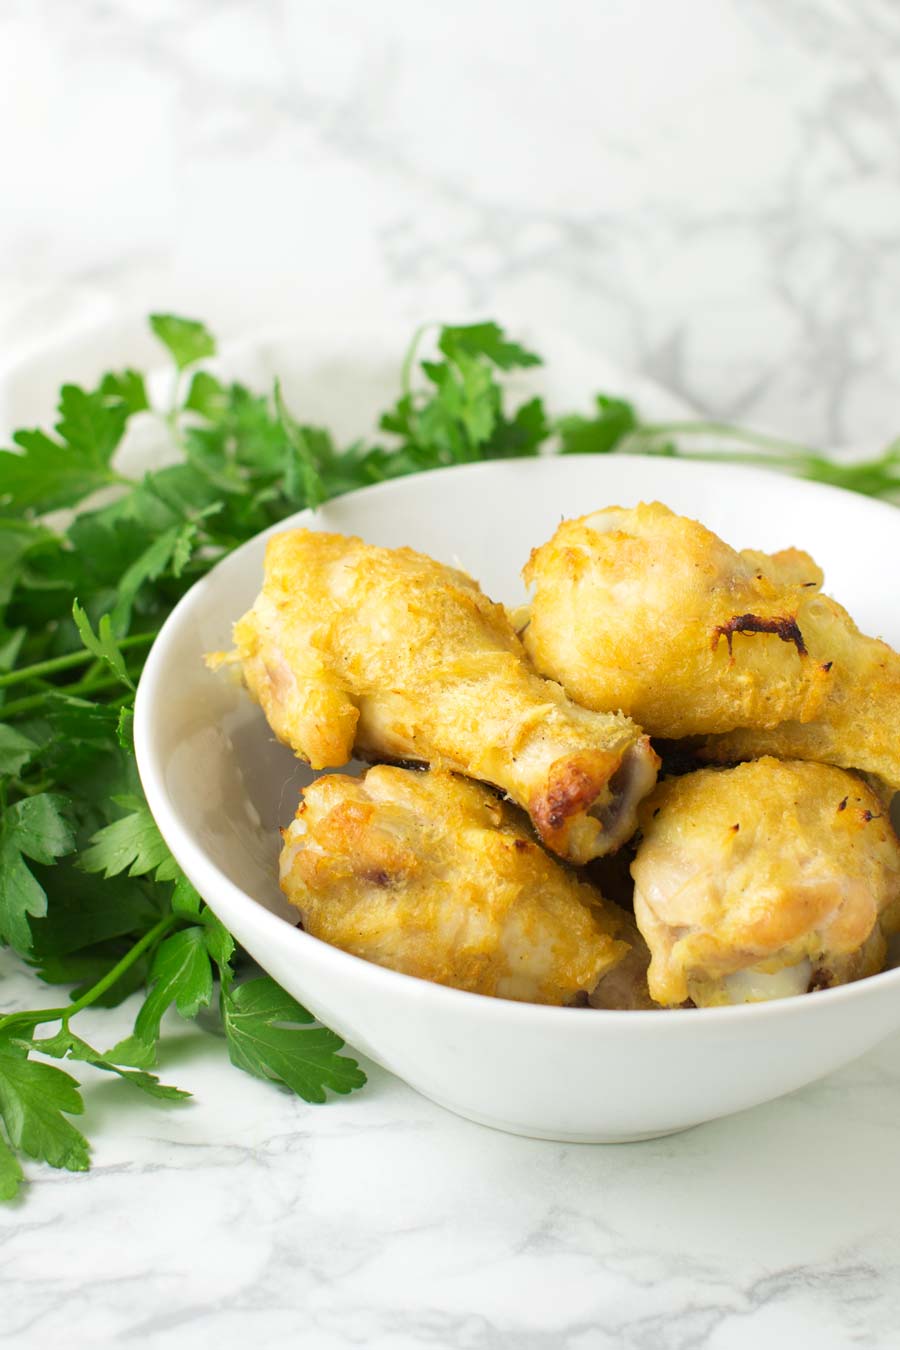 Pineapple Chicken Wings recipe from acleanplate.com #paleo #aip #glutenfree